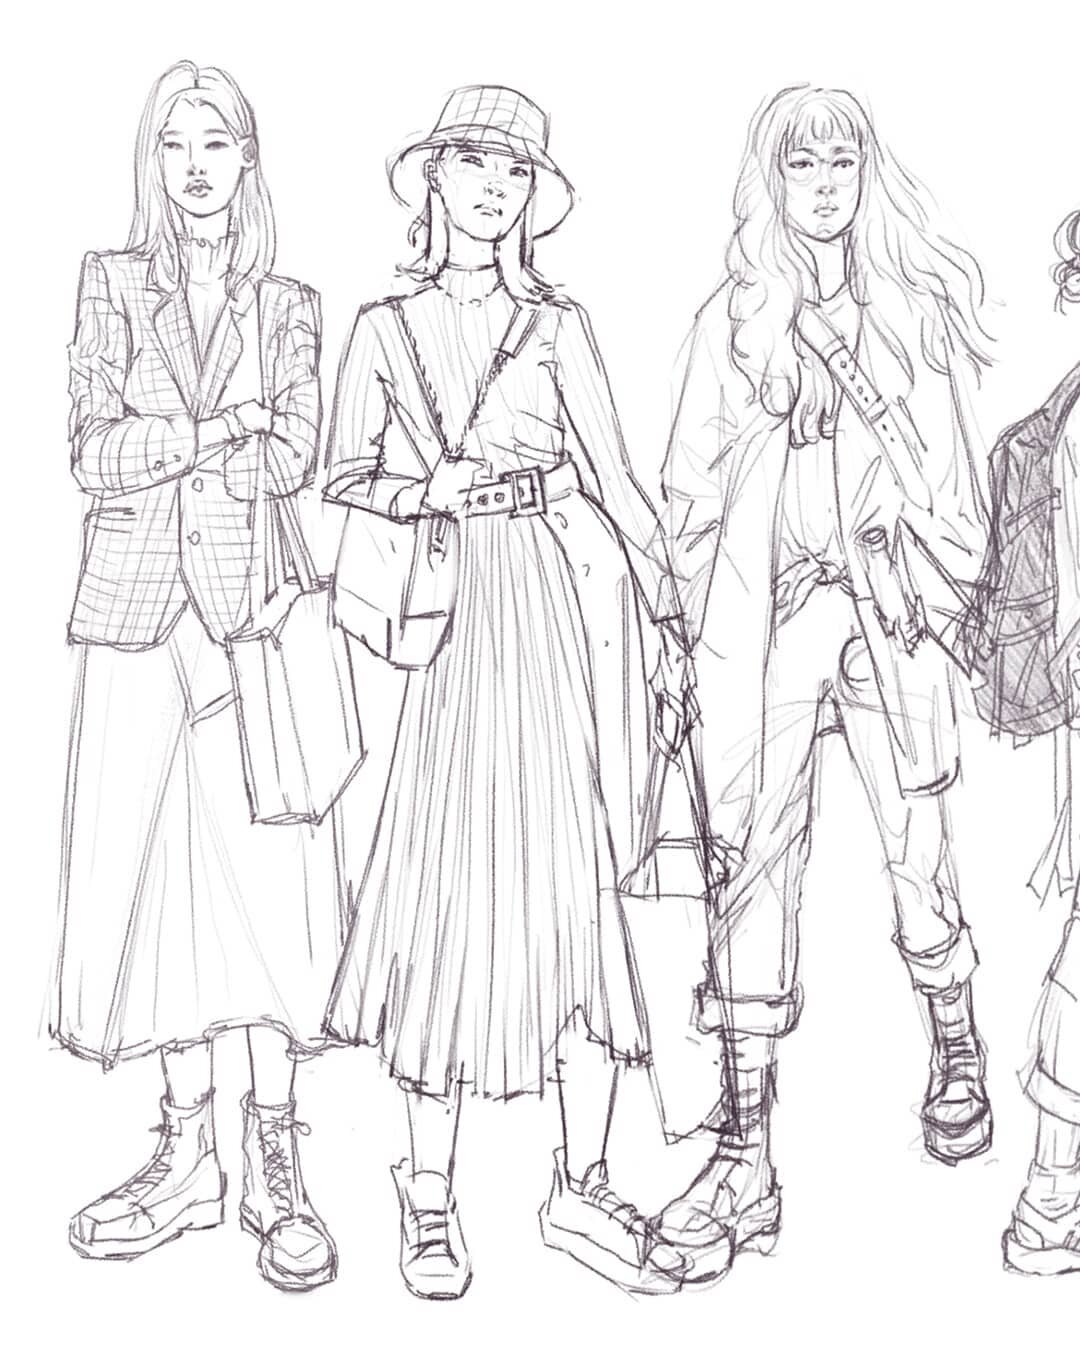 International Women's Day &bull; Pinterest studies &bull; Fashion illustration Sketches

Notice their expressions? No need to smile if you don't feel like it ladies. *smirk*